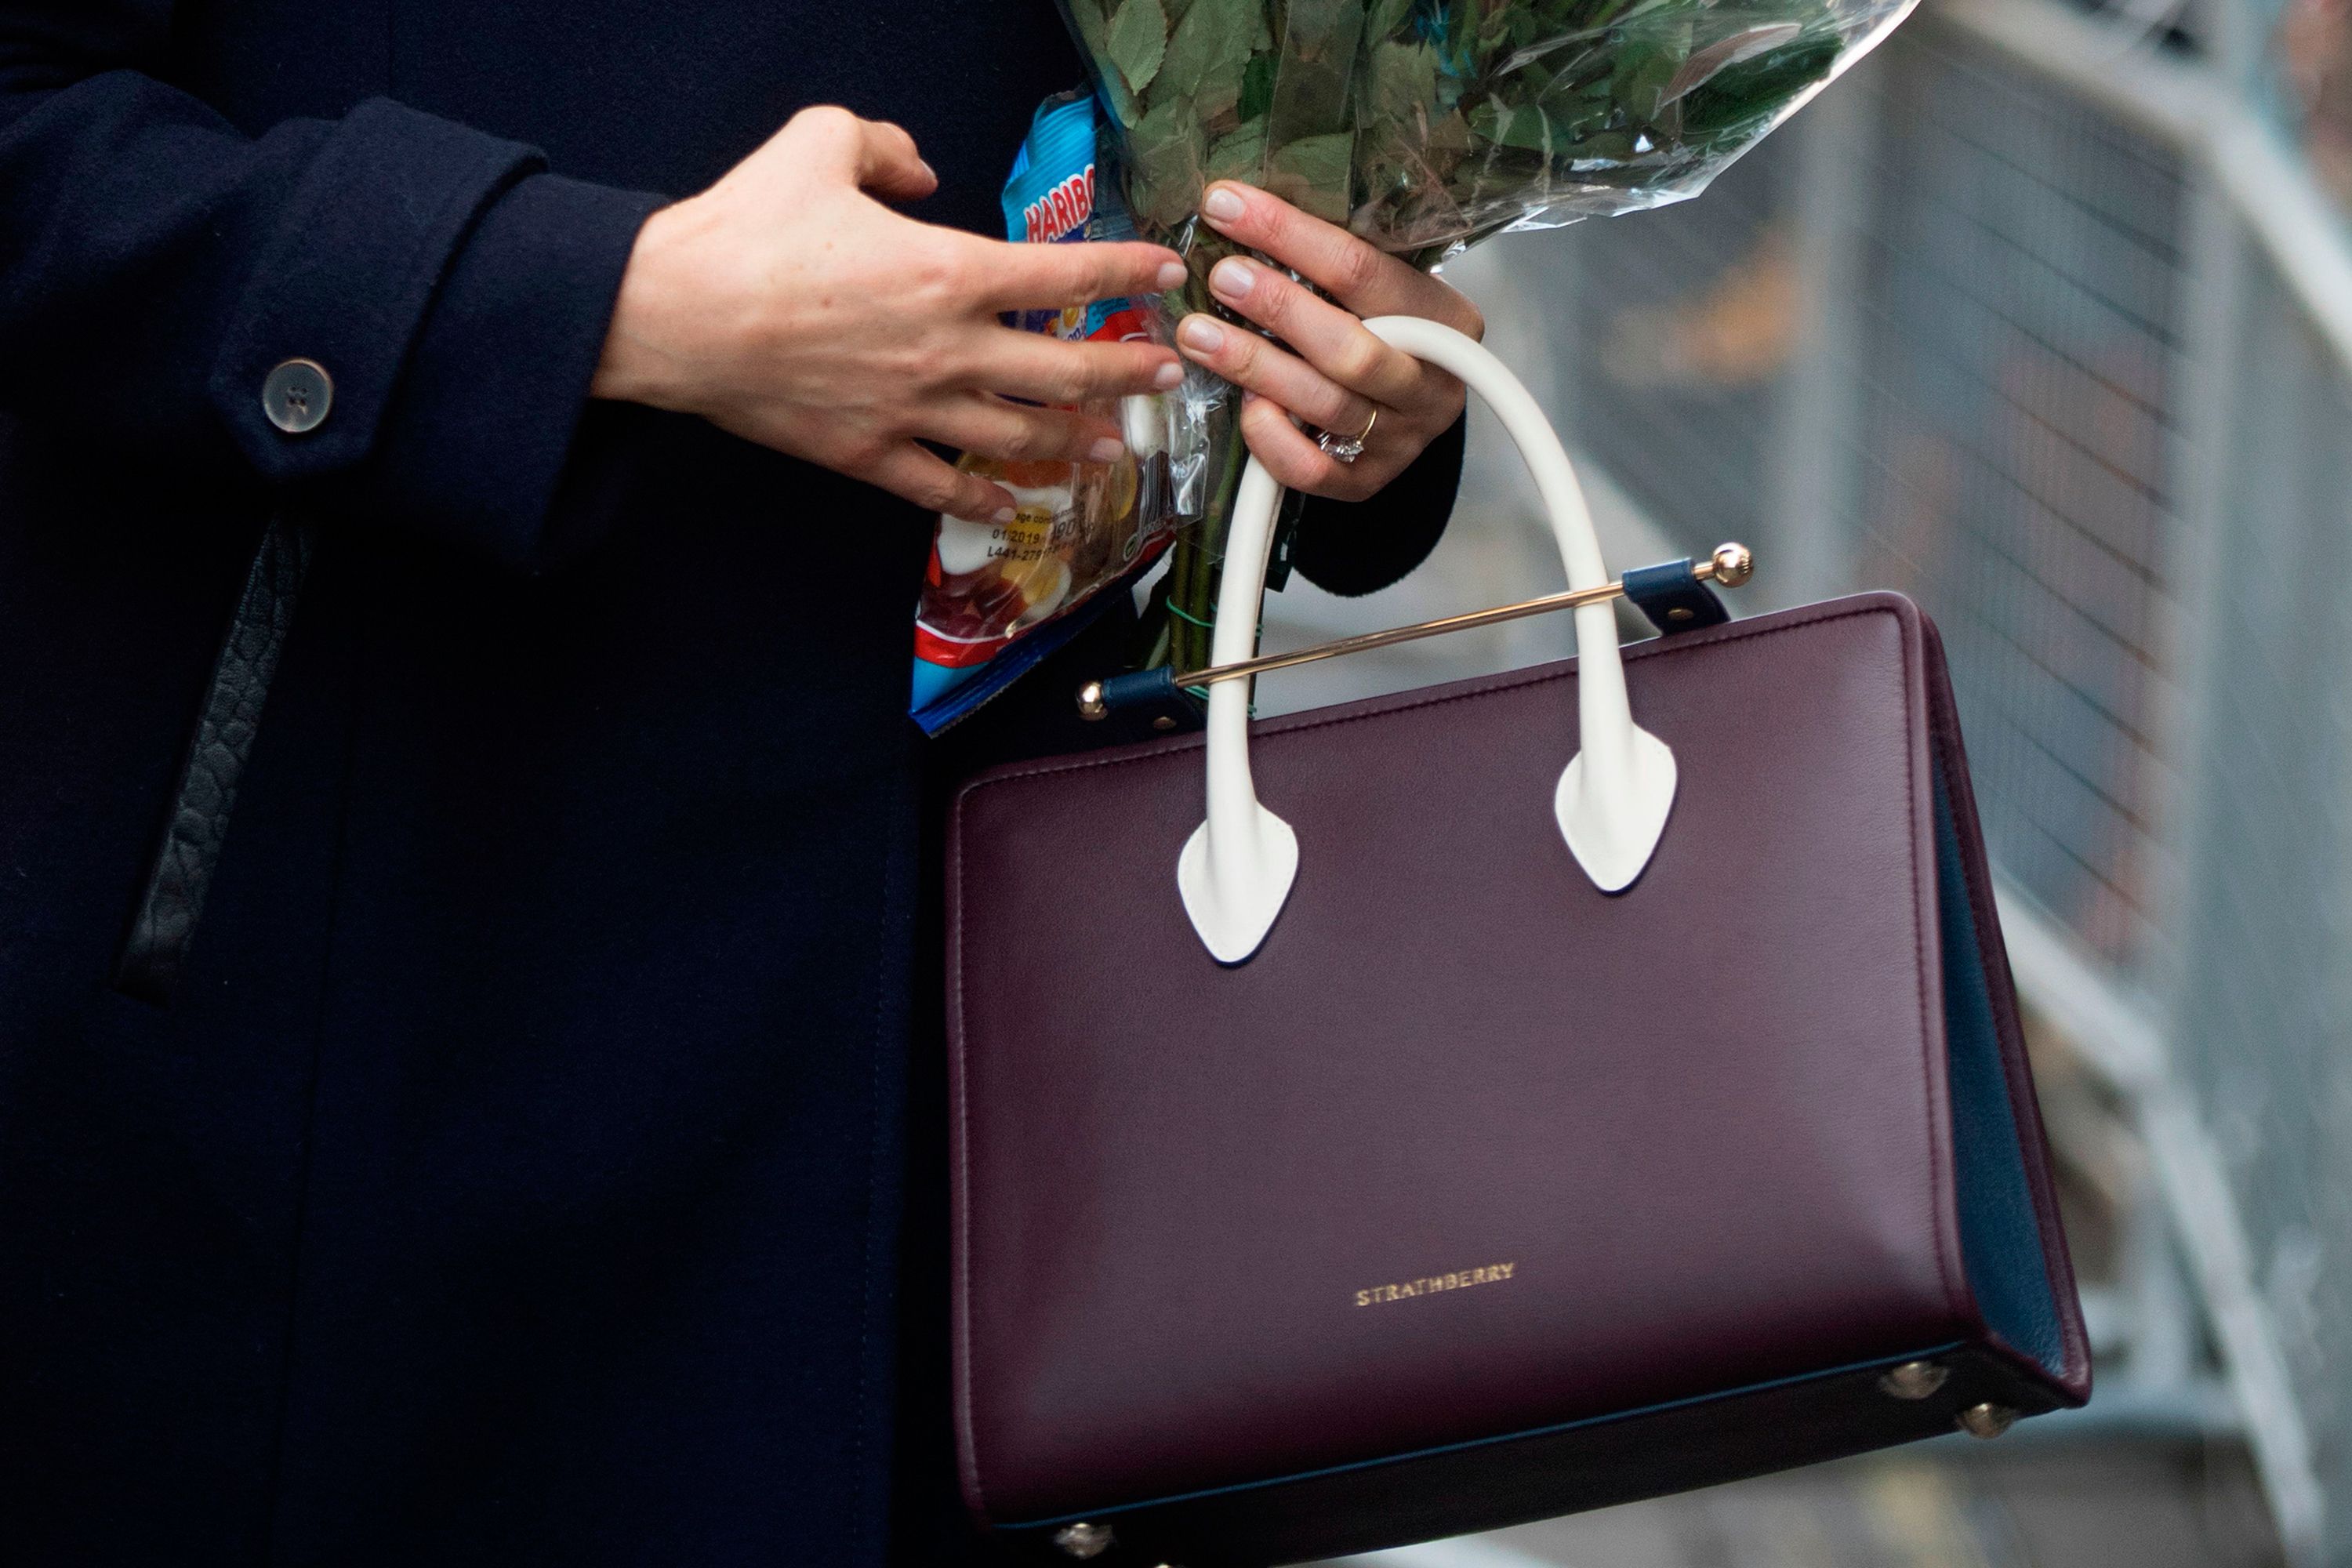 How Strathberry became the new British It bag (that you can actually afford)